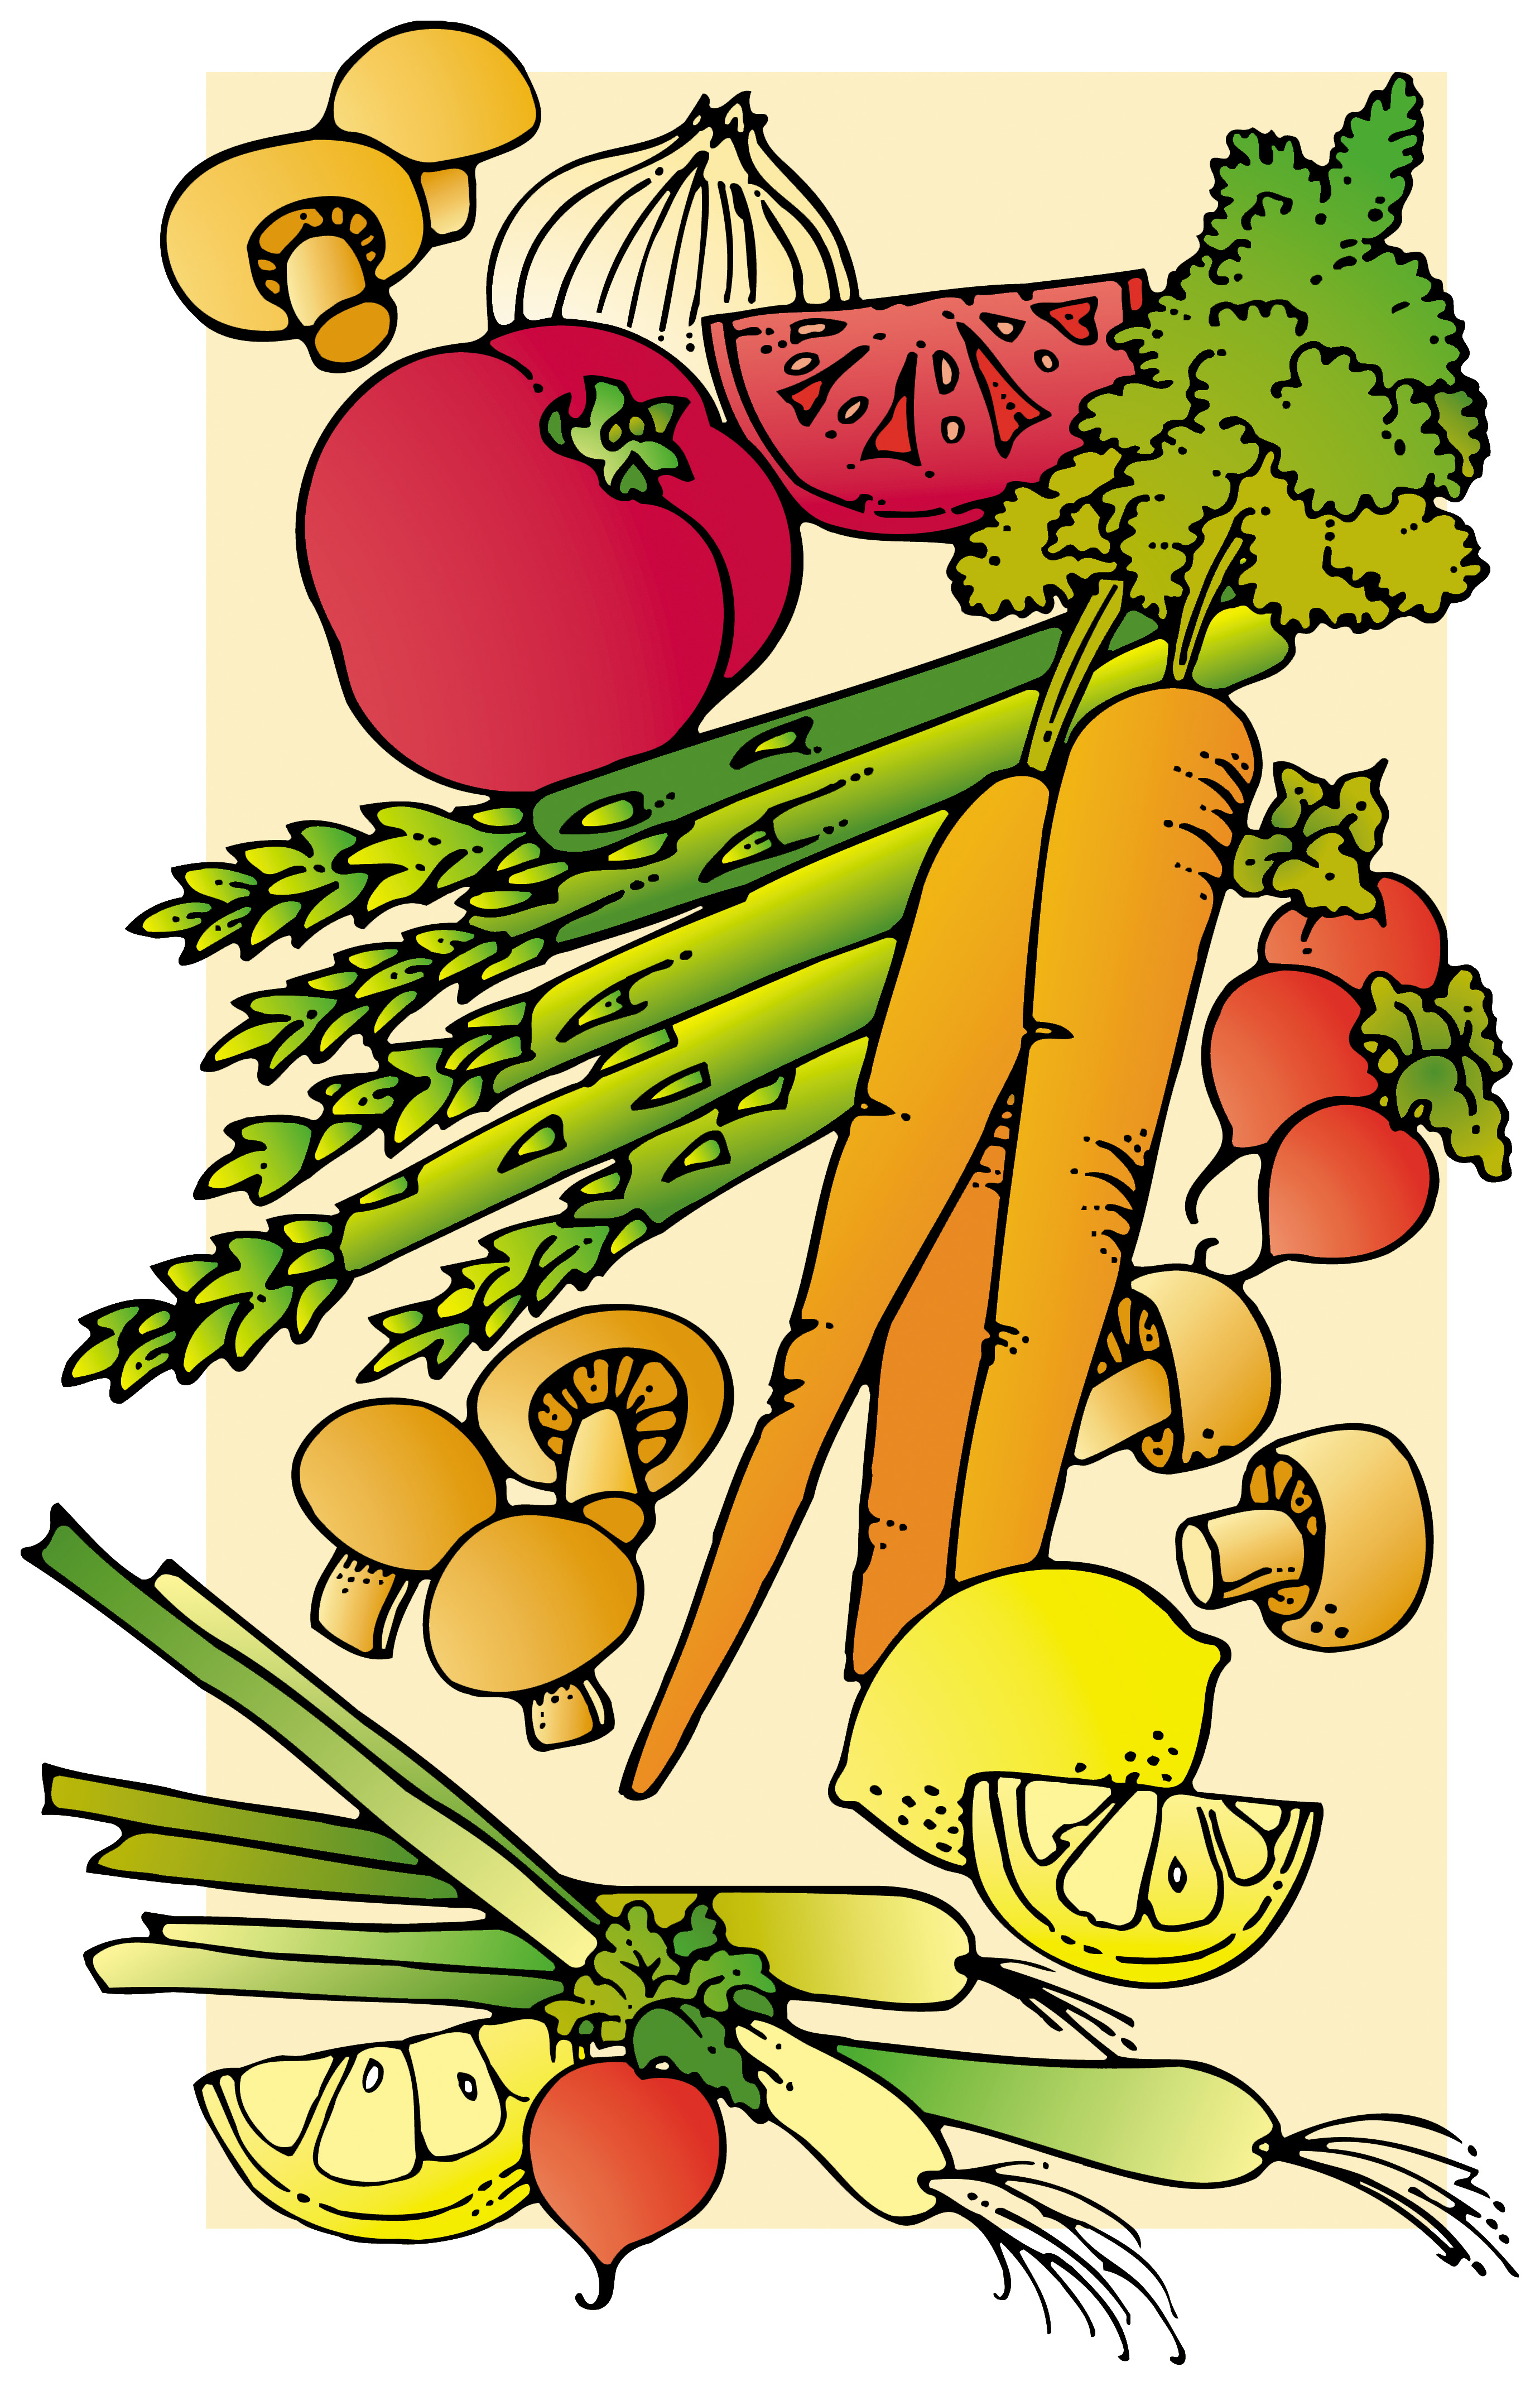 Healthy Foods Clipart - ClipArt Best